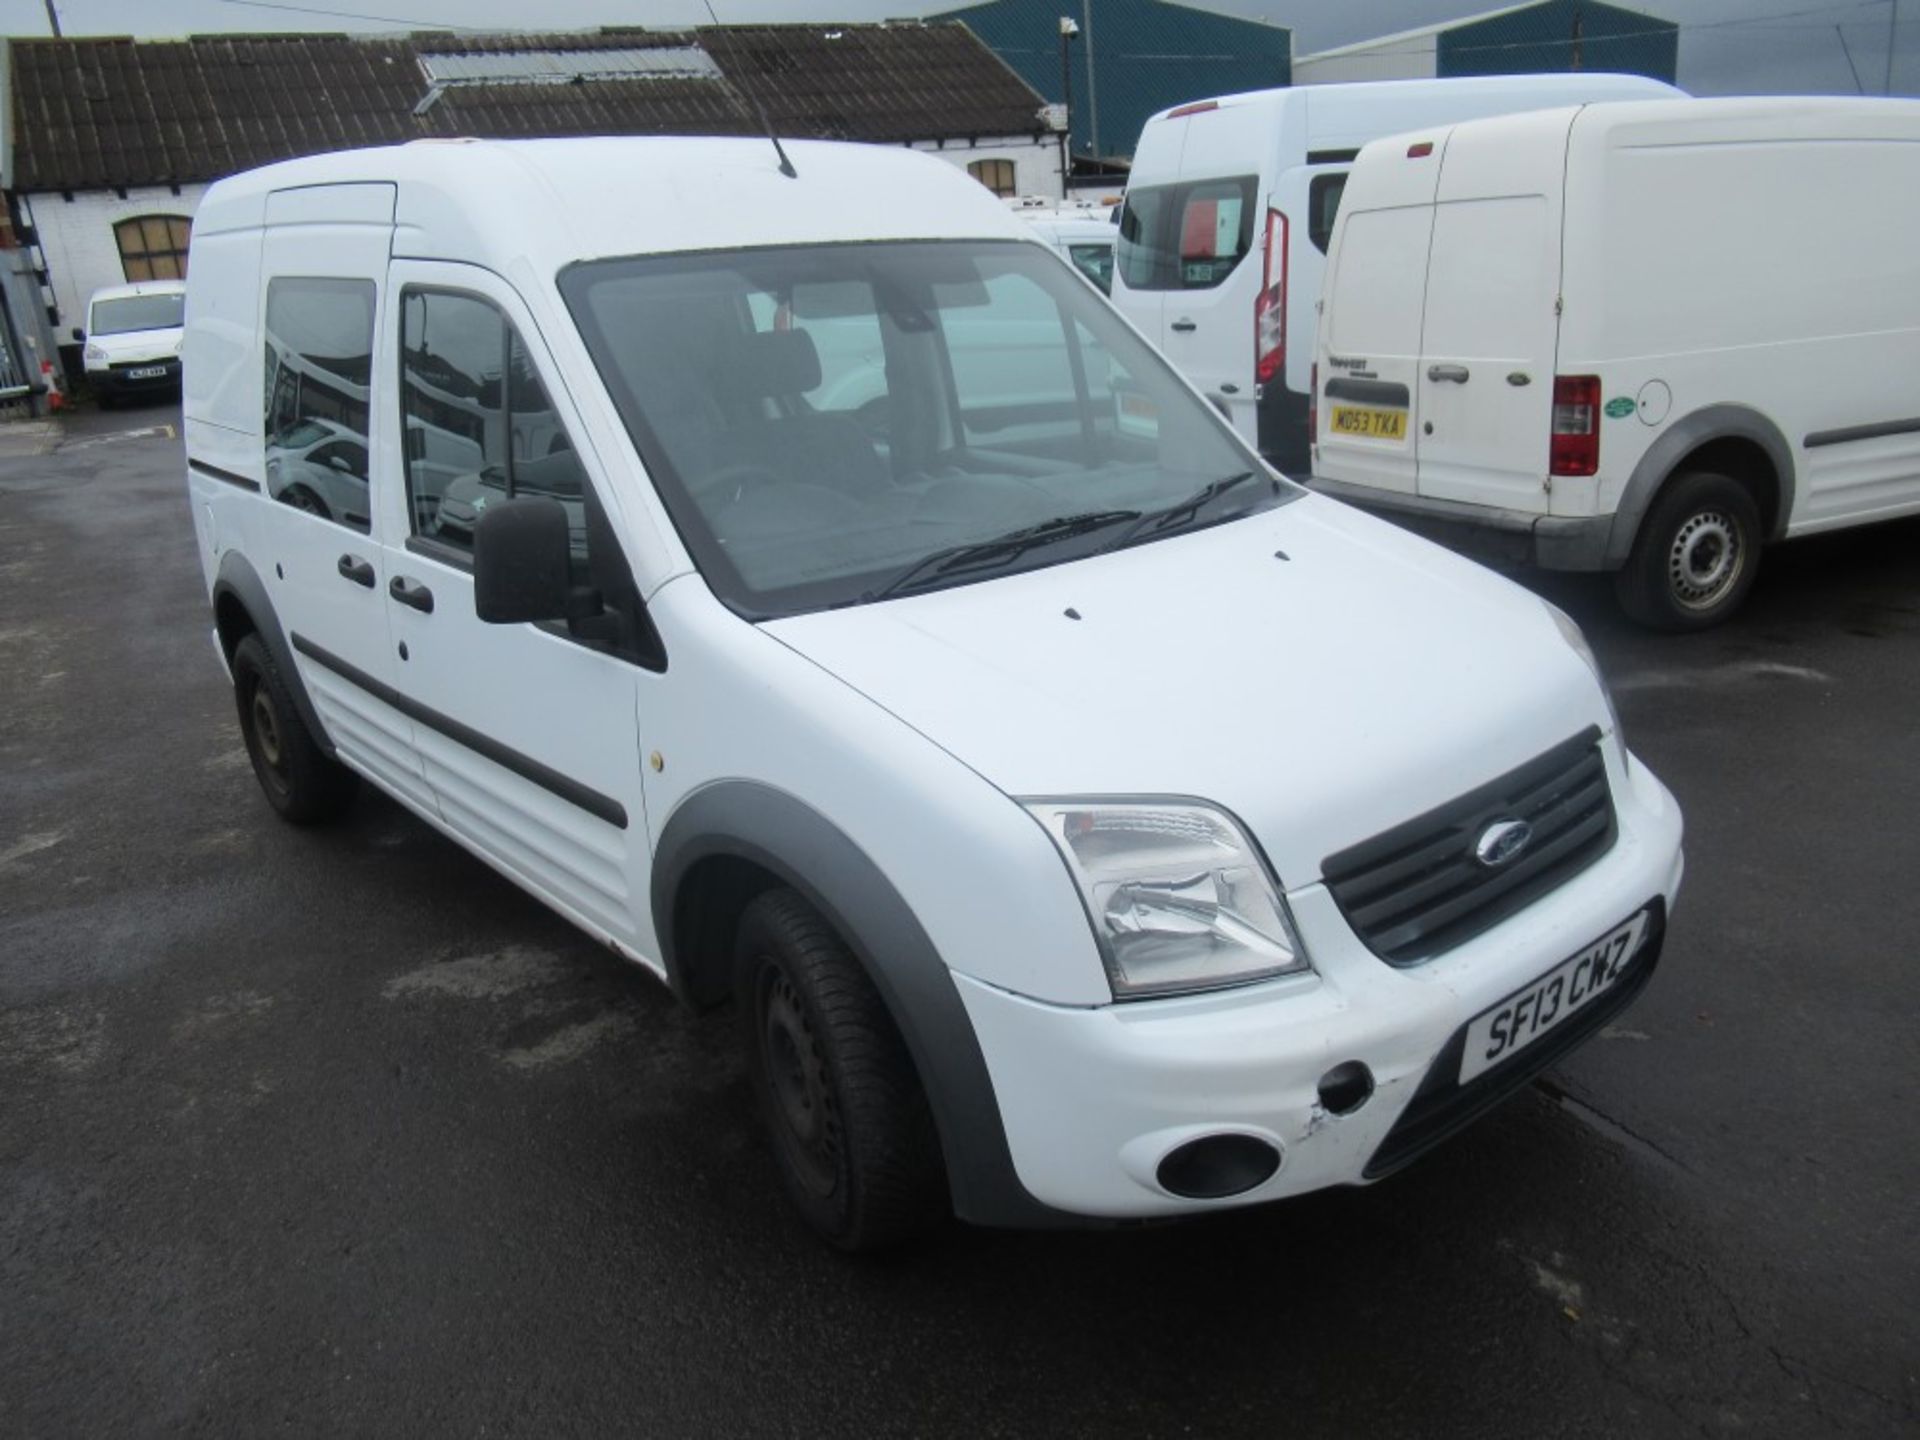 13 reg FORD TRANSIT CONNECT 90 T230 TREND, 1ST REG 03/13, 153853M WARRANTED, V5 HERE, 1 OWNER FROM